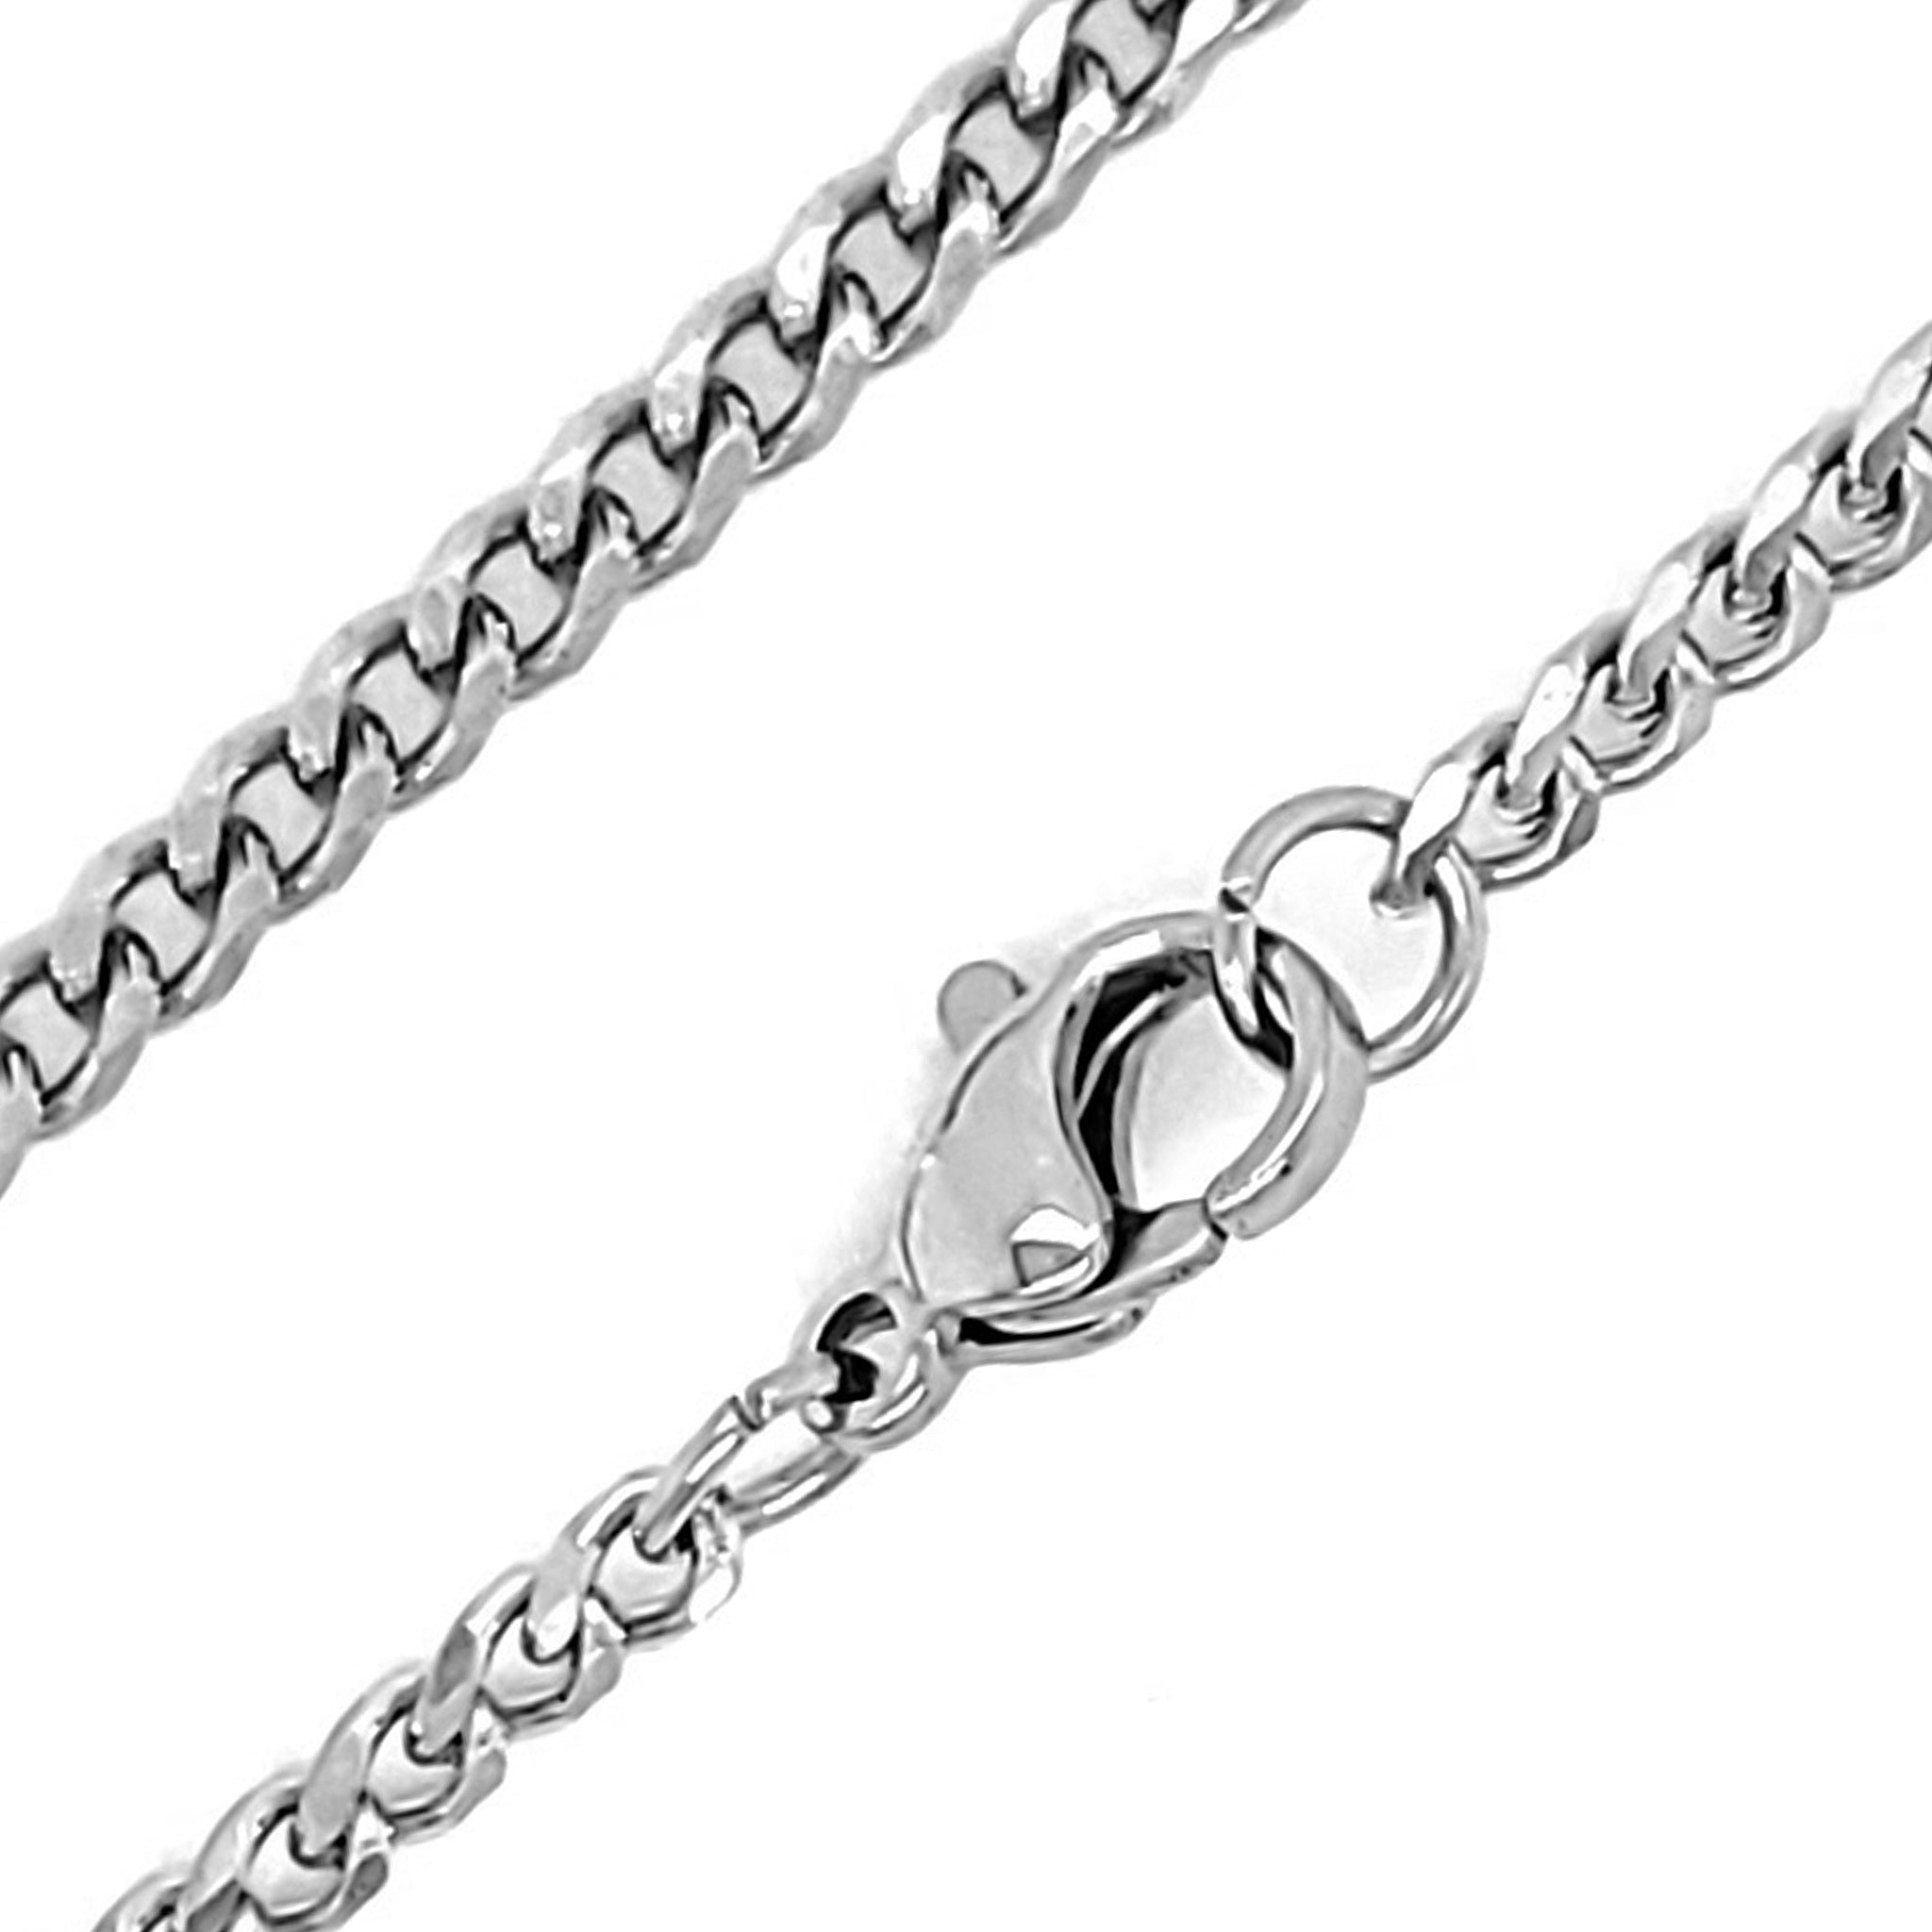 NKJ2498 - Stainless Steel Curb Chain Necklace-stainless steel jewelry good- stainless steel jewelry cleaner- gold stainless steel jewelry- stainless steel jewelries- stainless steel jewelry mens